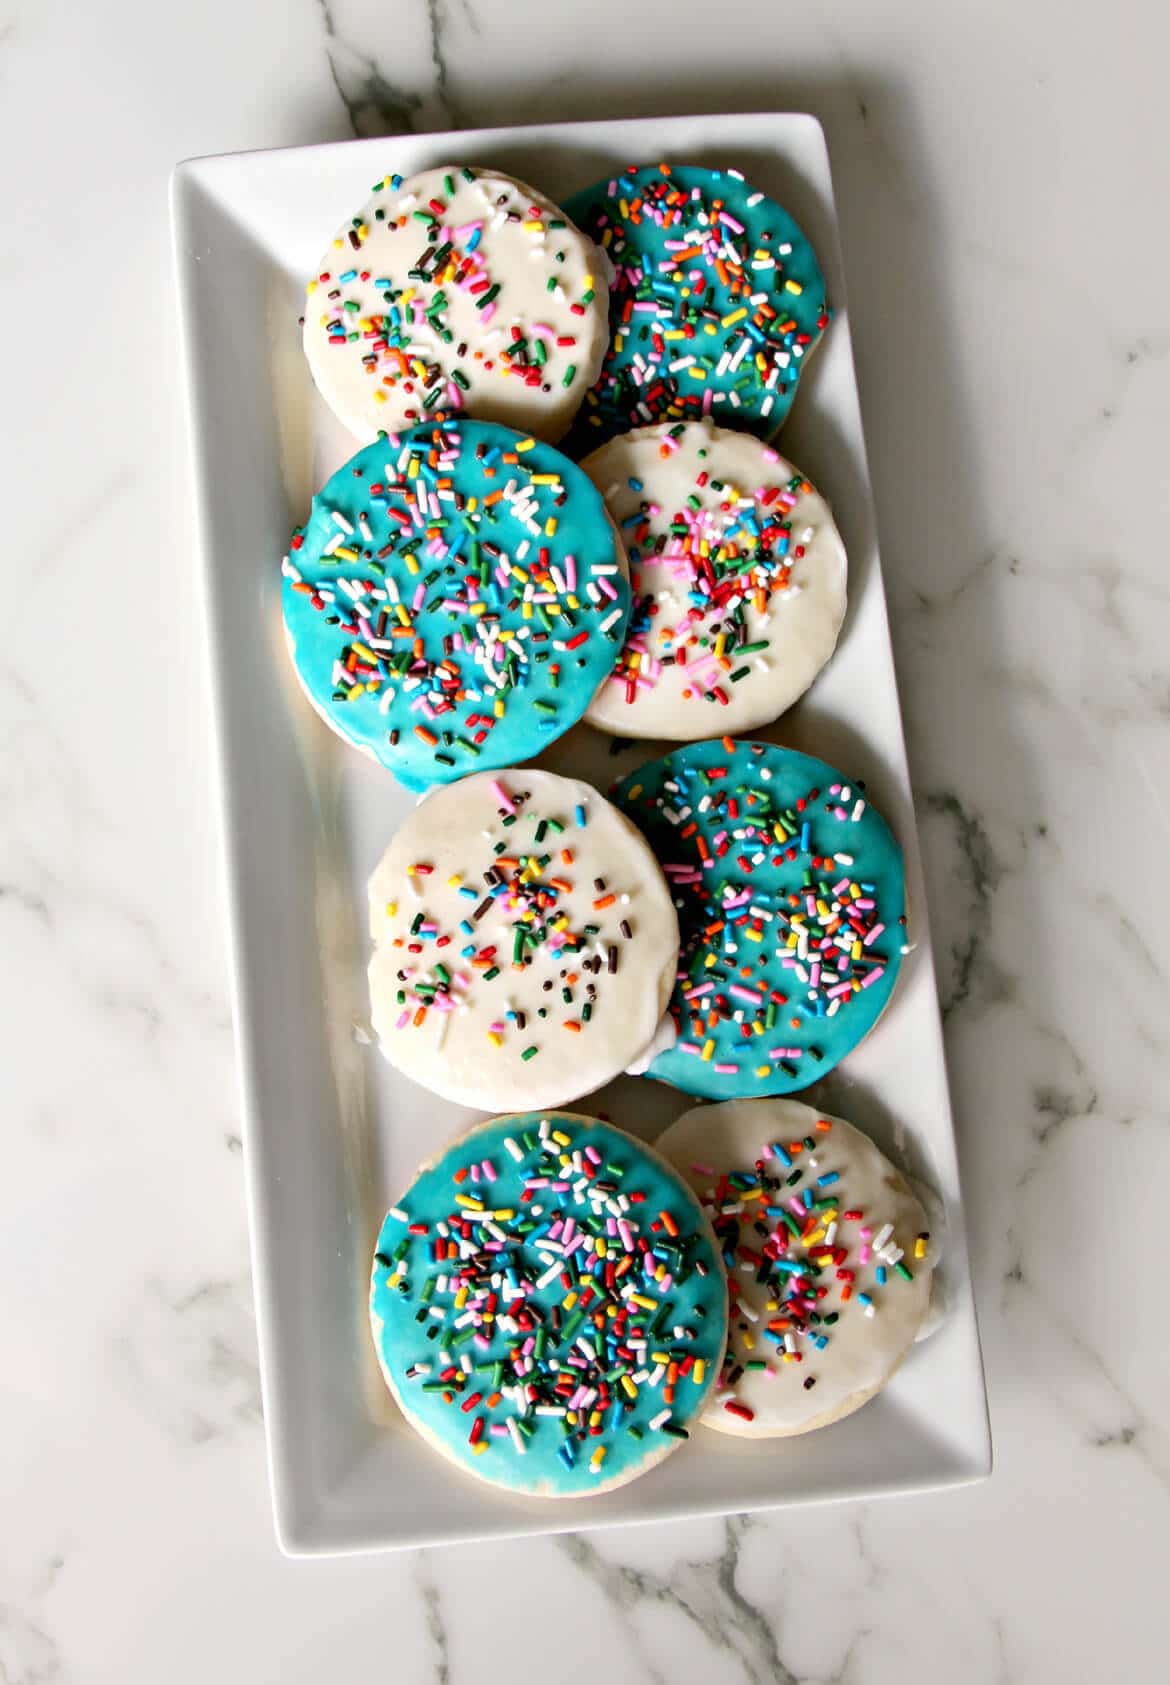 A delicious and easy sugar cookie recipe with simple icing that's quick and easy to apply. And sprinkles, of course! Kids love these cookies.